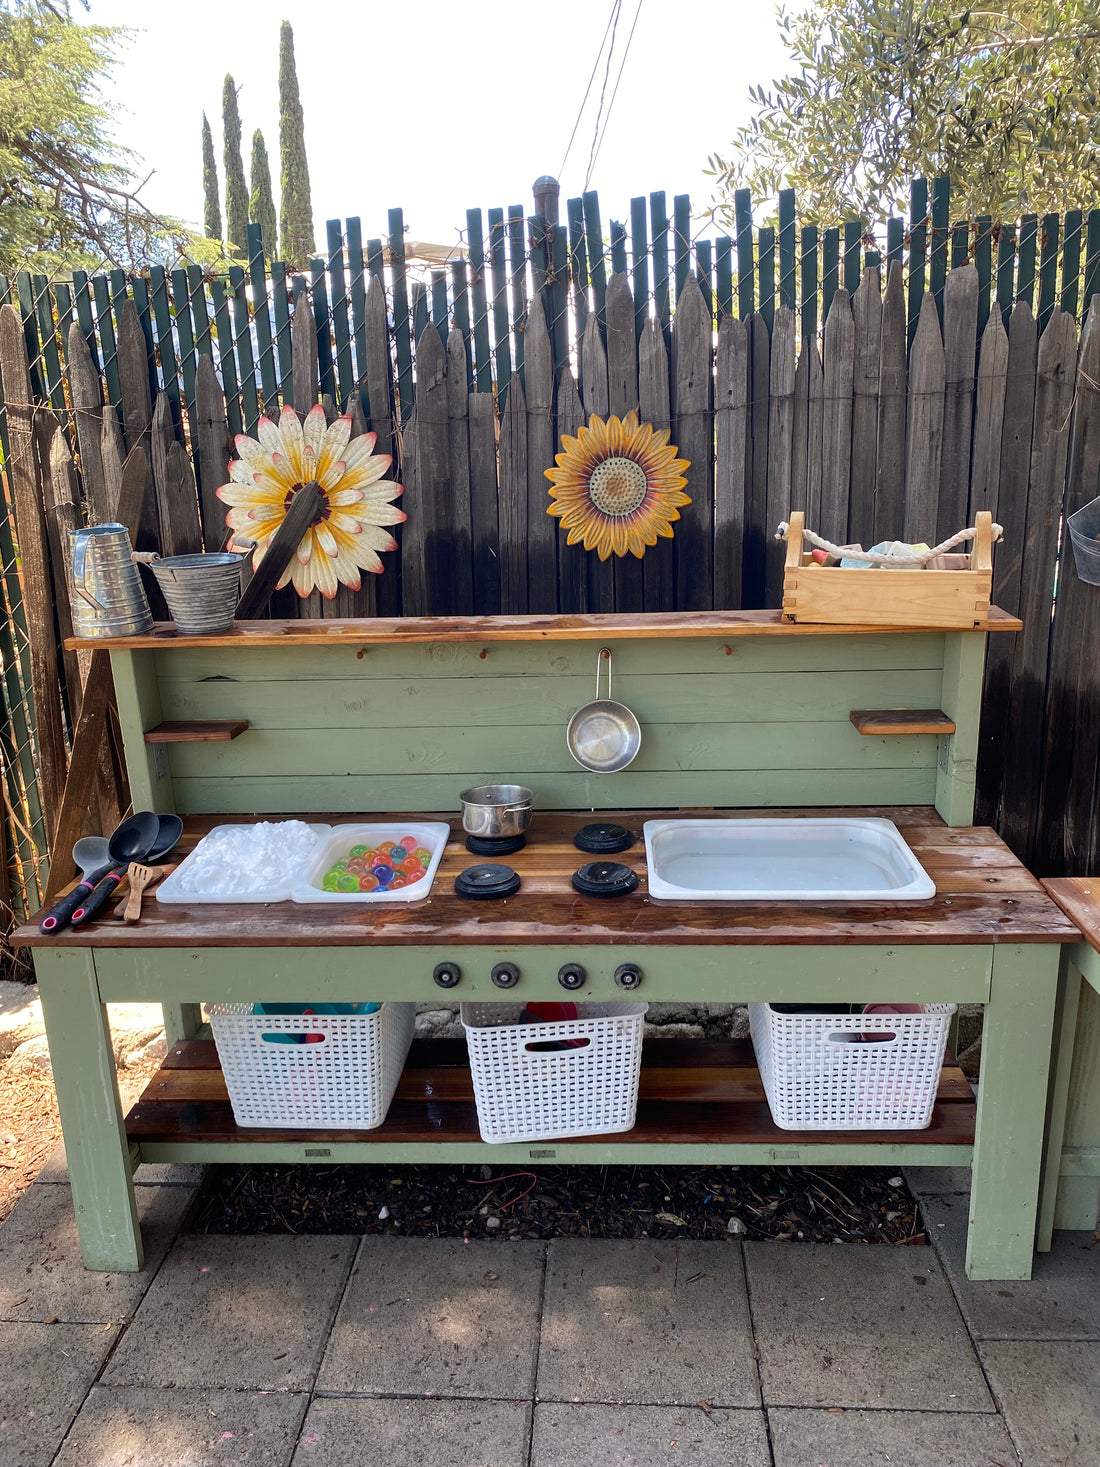 Green and redwood mud kitchen with shaving cream and water for sensory play